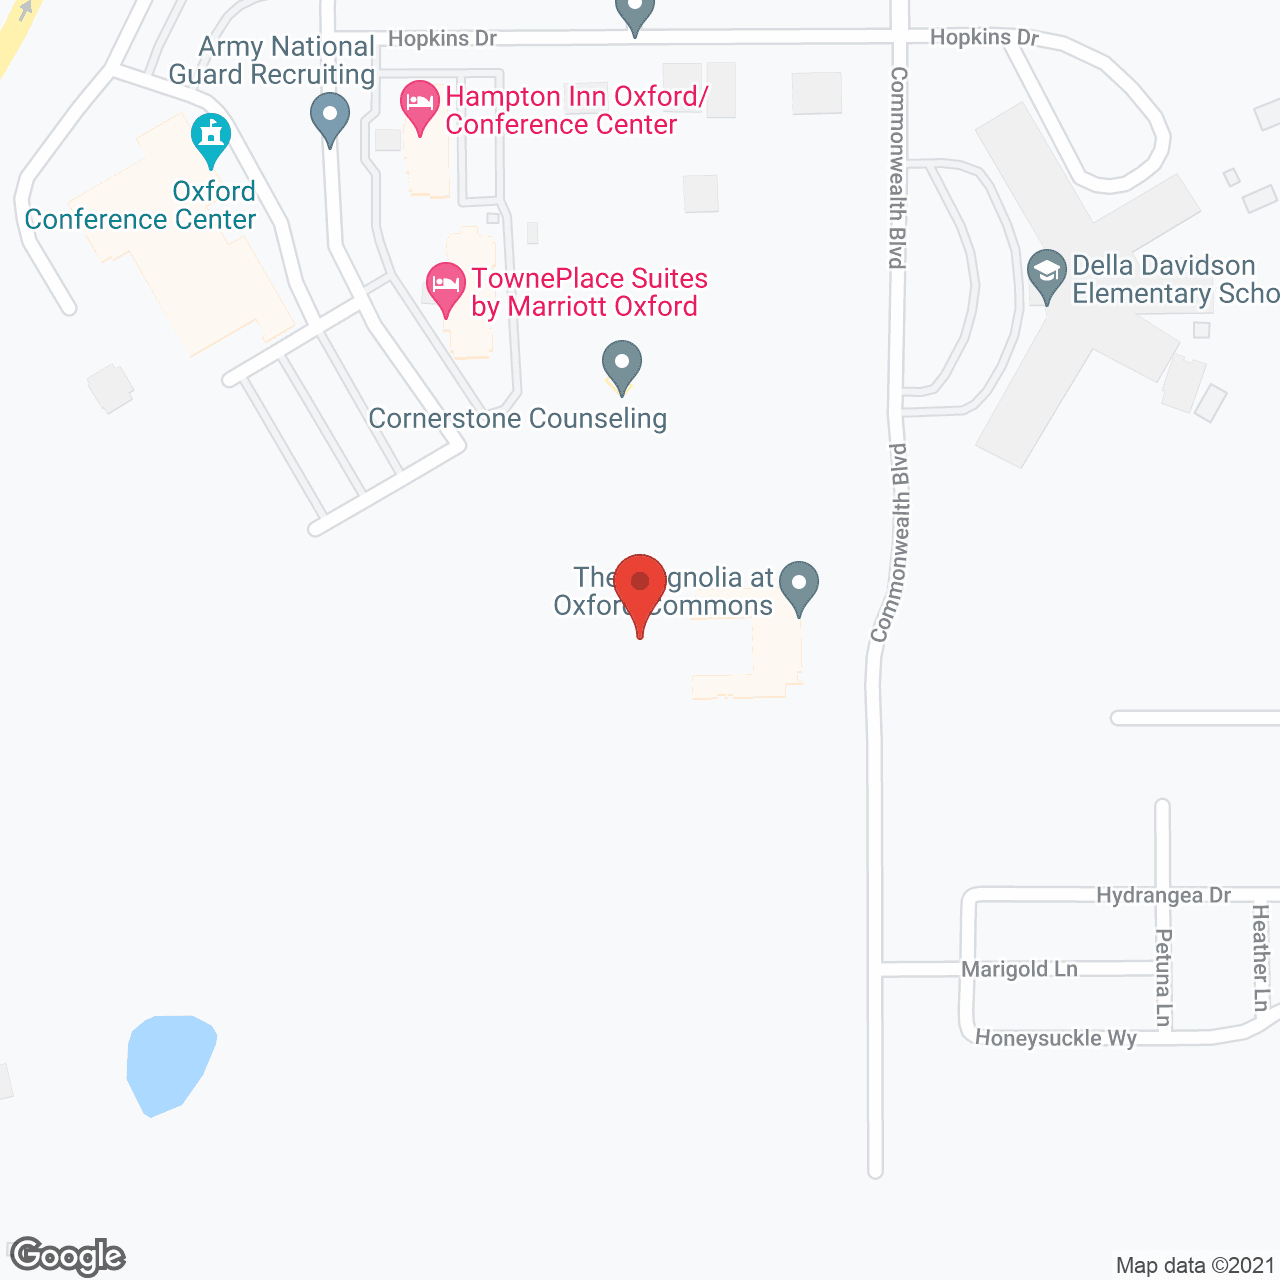 The Magnolia at Oxford Commons in google map